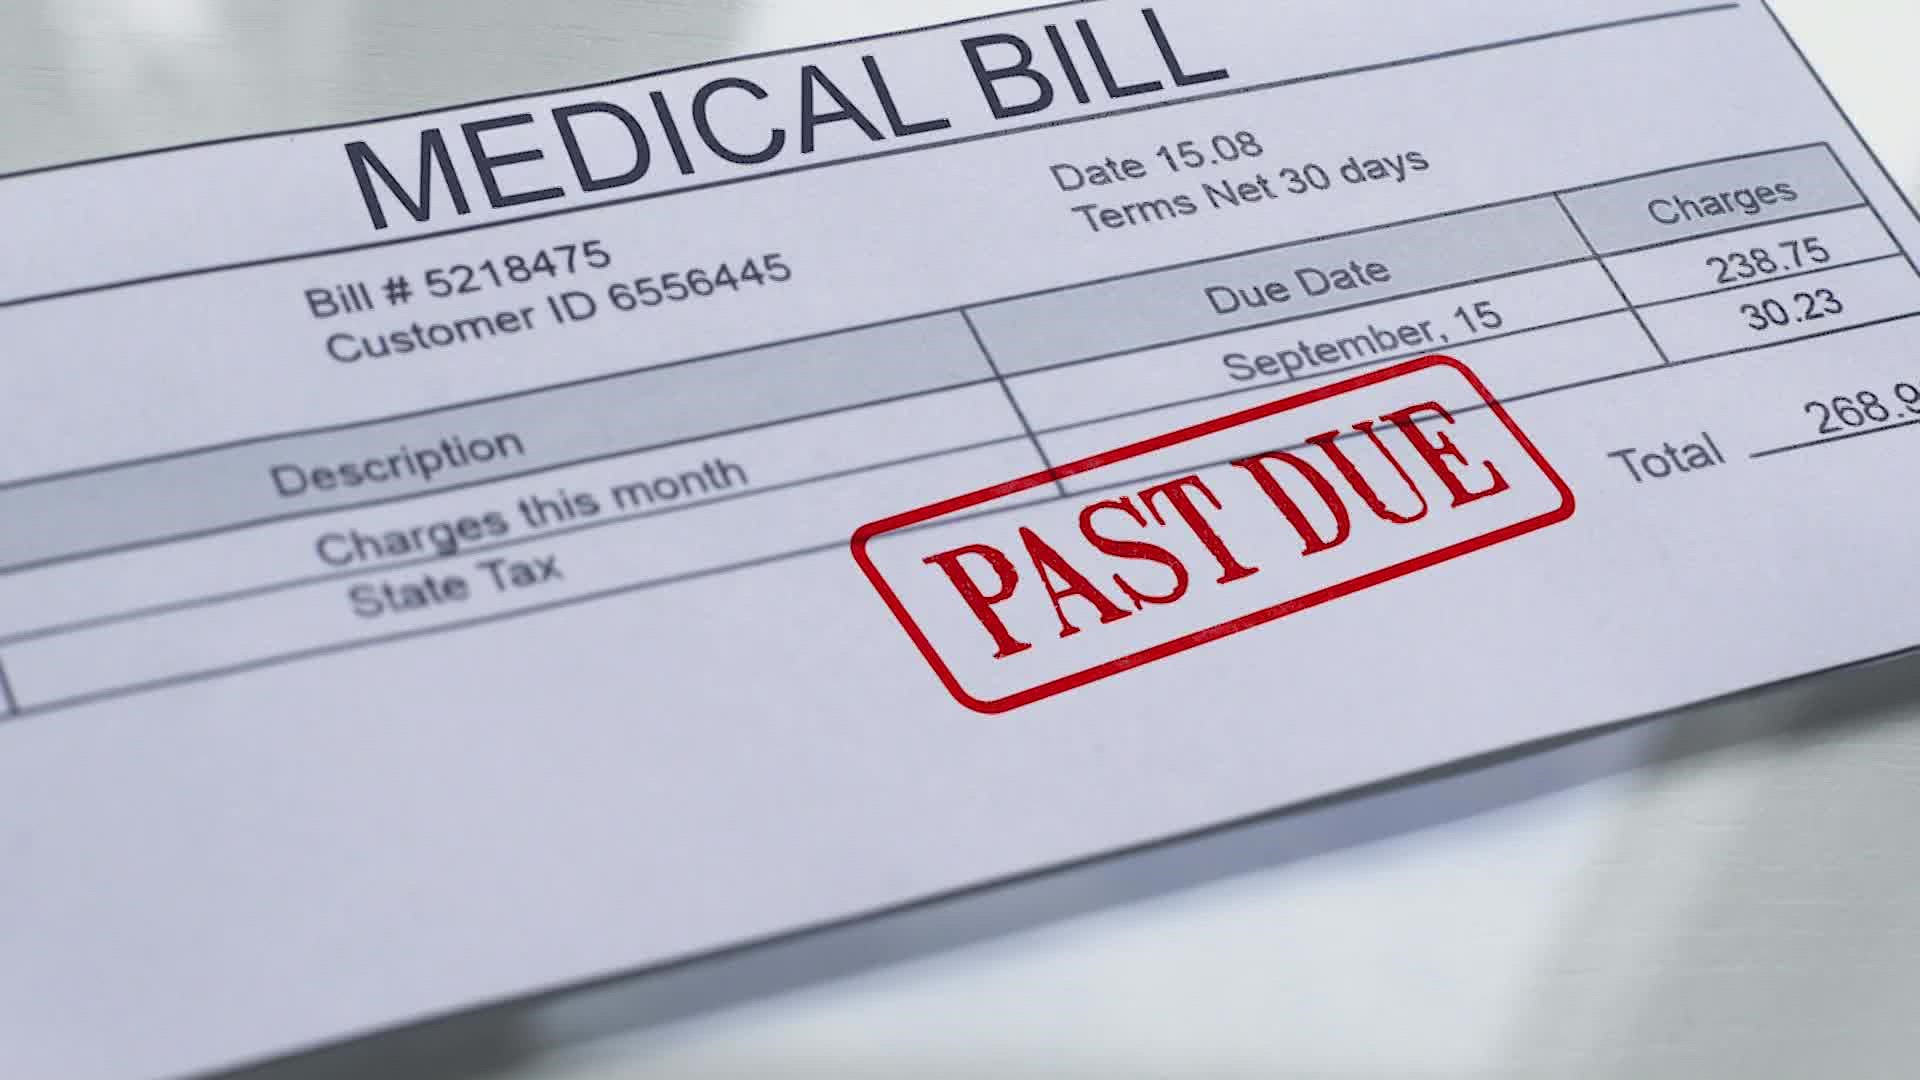 Most medical debt will be wiped from credit reports. Here's why. | khou.com